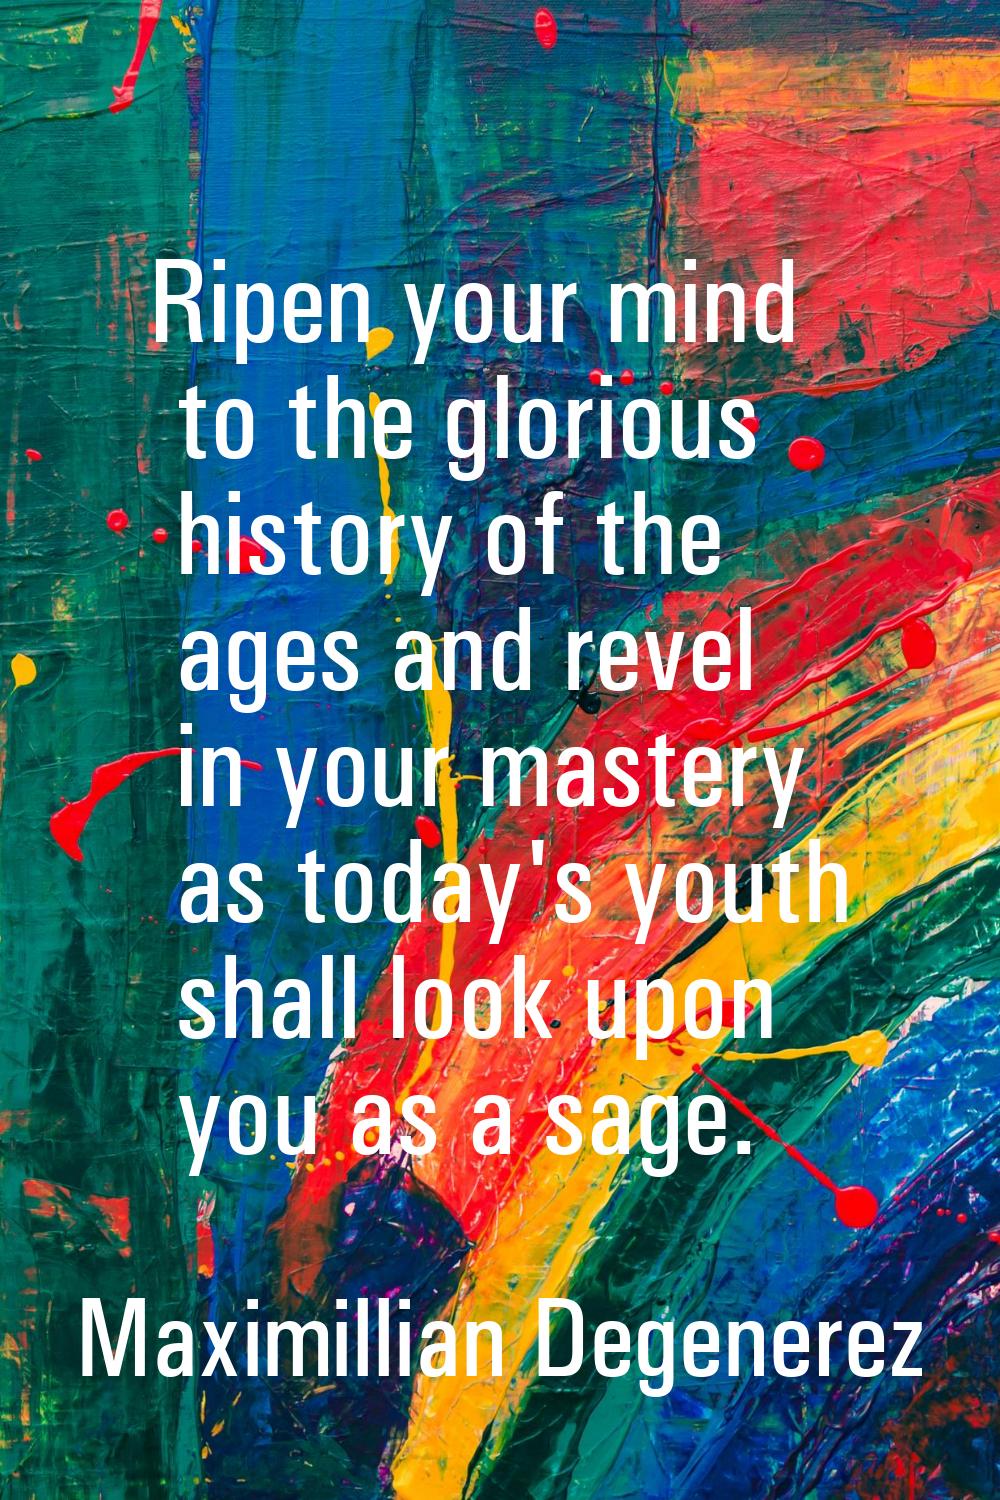 Ripen your mind to the glorious history of the ages and revel in your mastery as today's youth shal